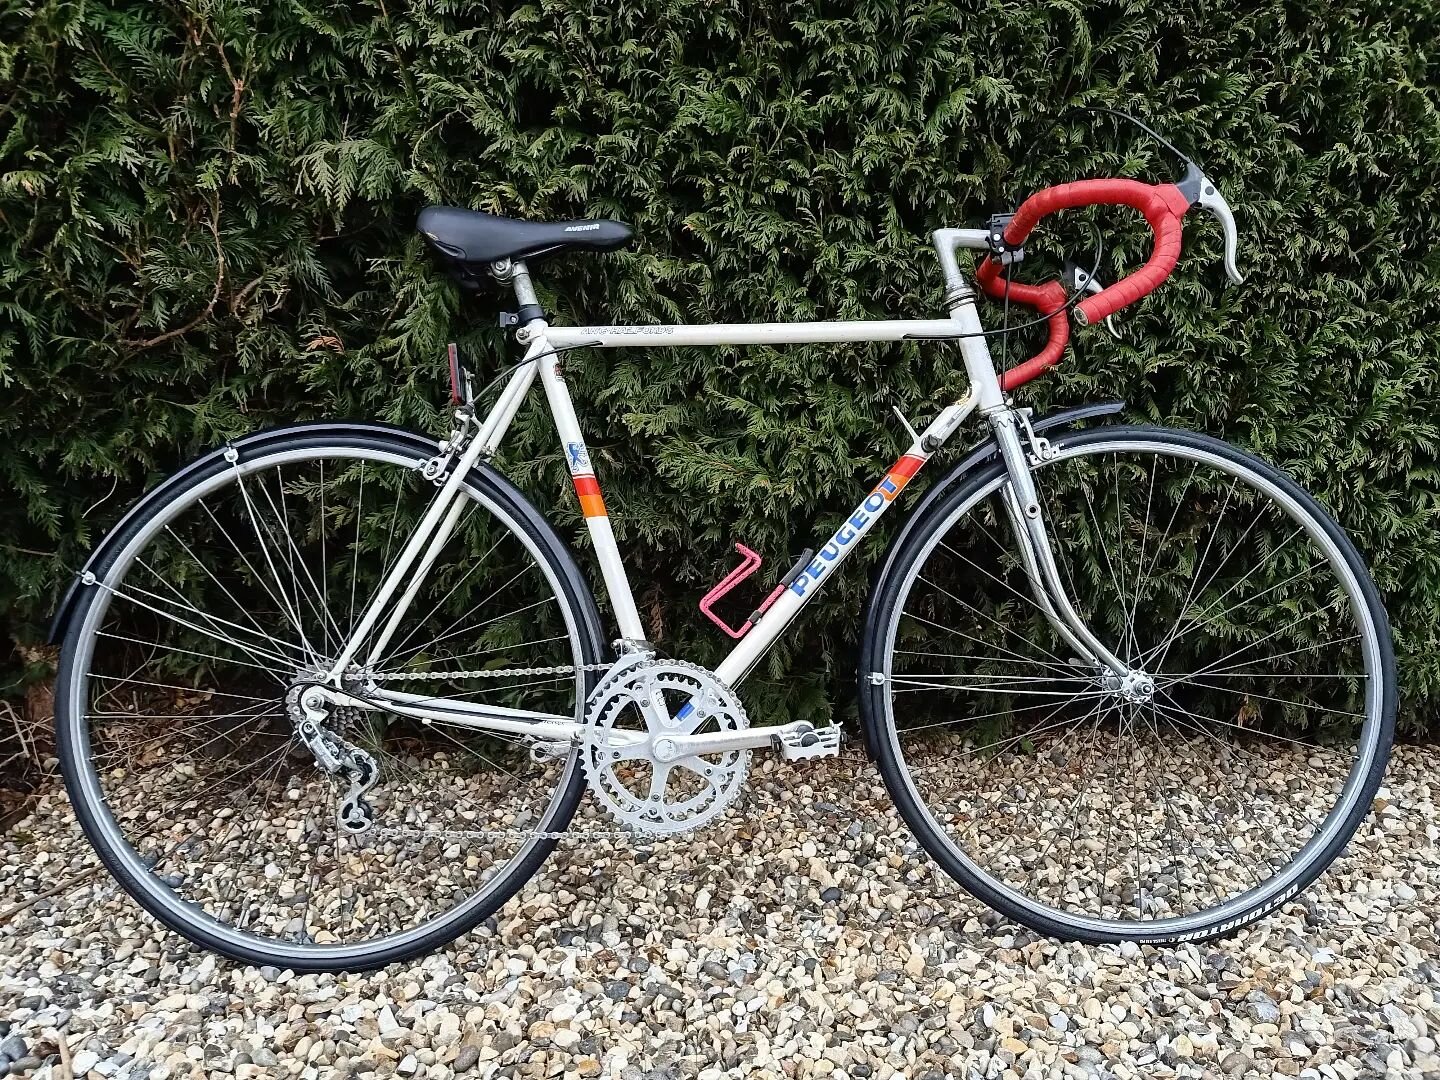 A little gem in this week. Still working nicely but needed a deep clean to keep that sparkle and everything running smoothly. #steelisreal

#peugotbike #classic #roadracer #tourdefrance #cycling #mucoff #bikeservice #mechaniclife #pershore